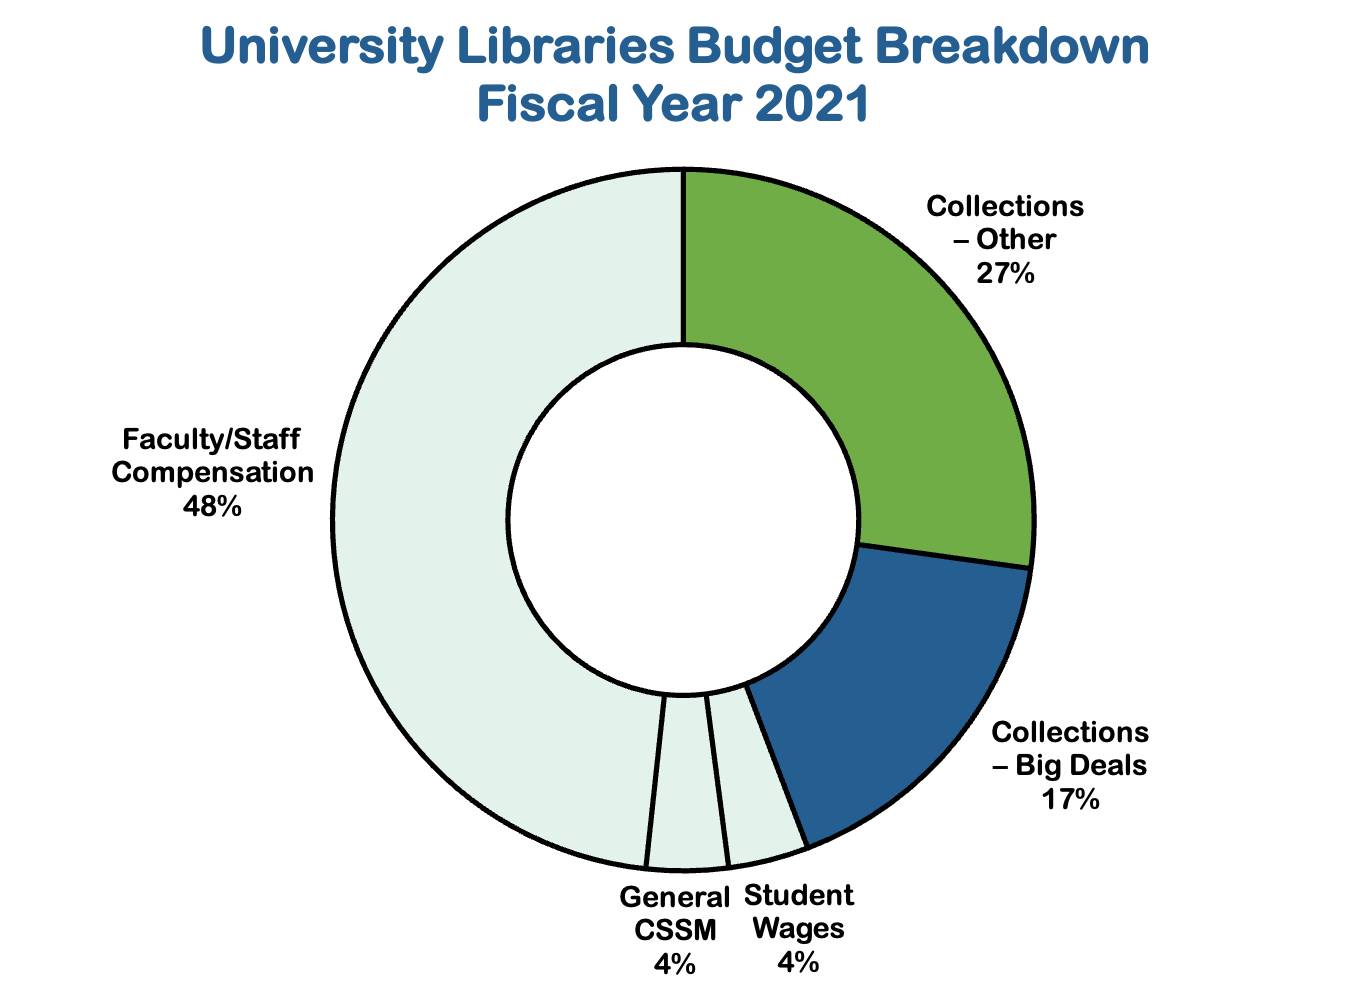 Donut chart showing the Libraries budget. 44% of the Libraries budget is spent on Collections. 17% of the total budget is spent on Big Deals subscriptions each year.